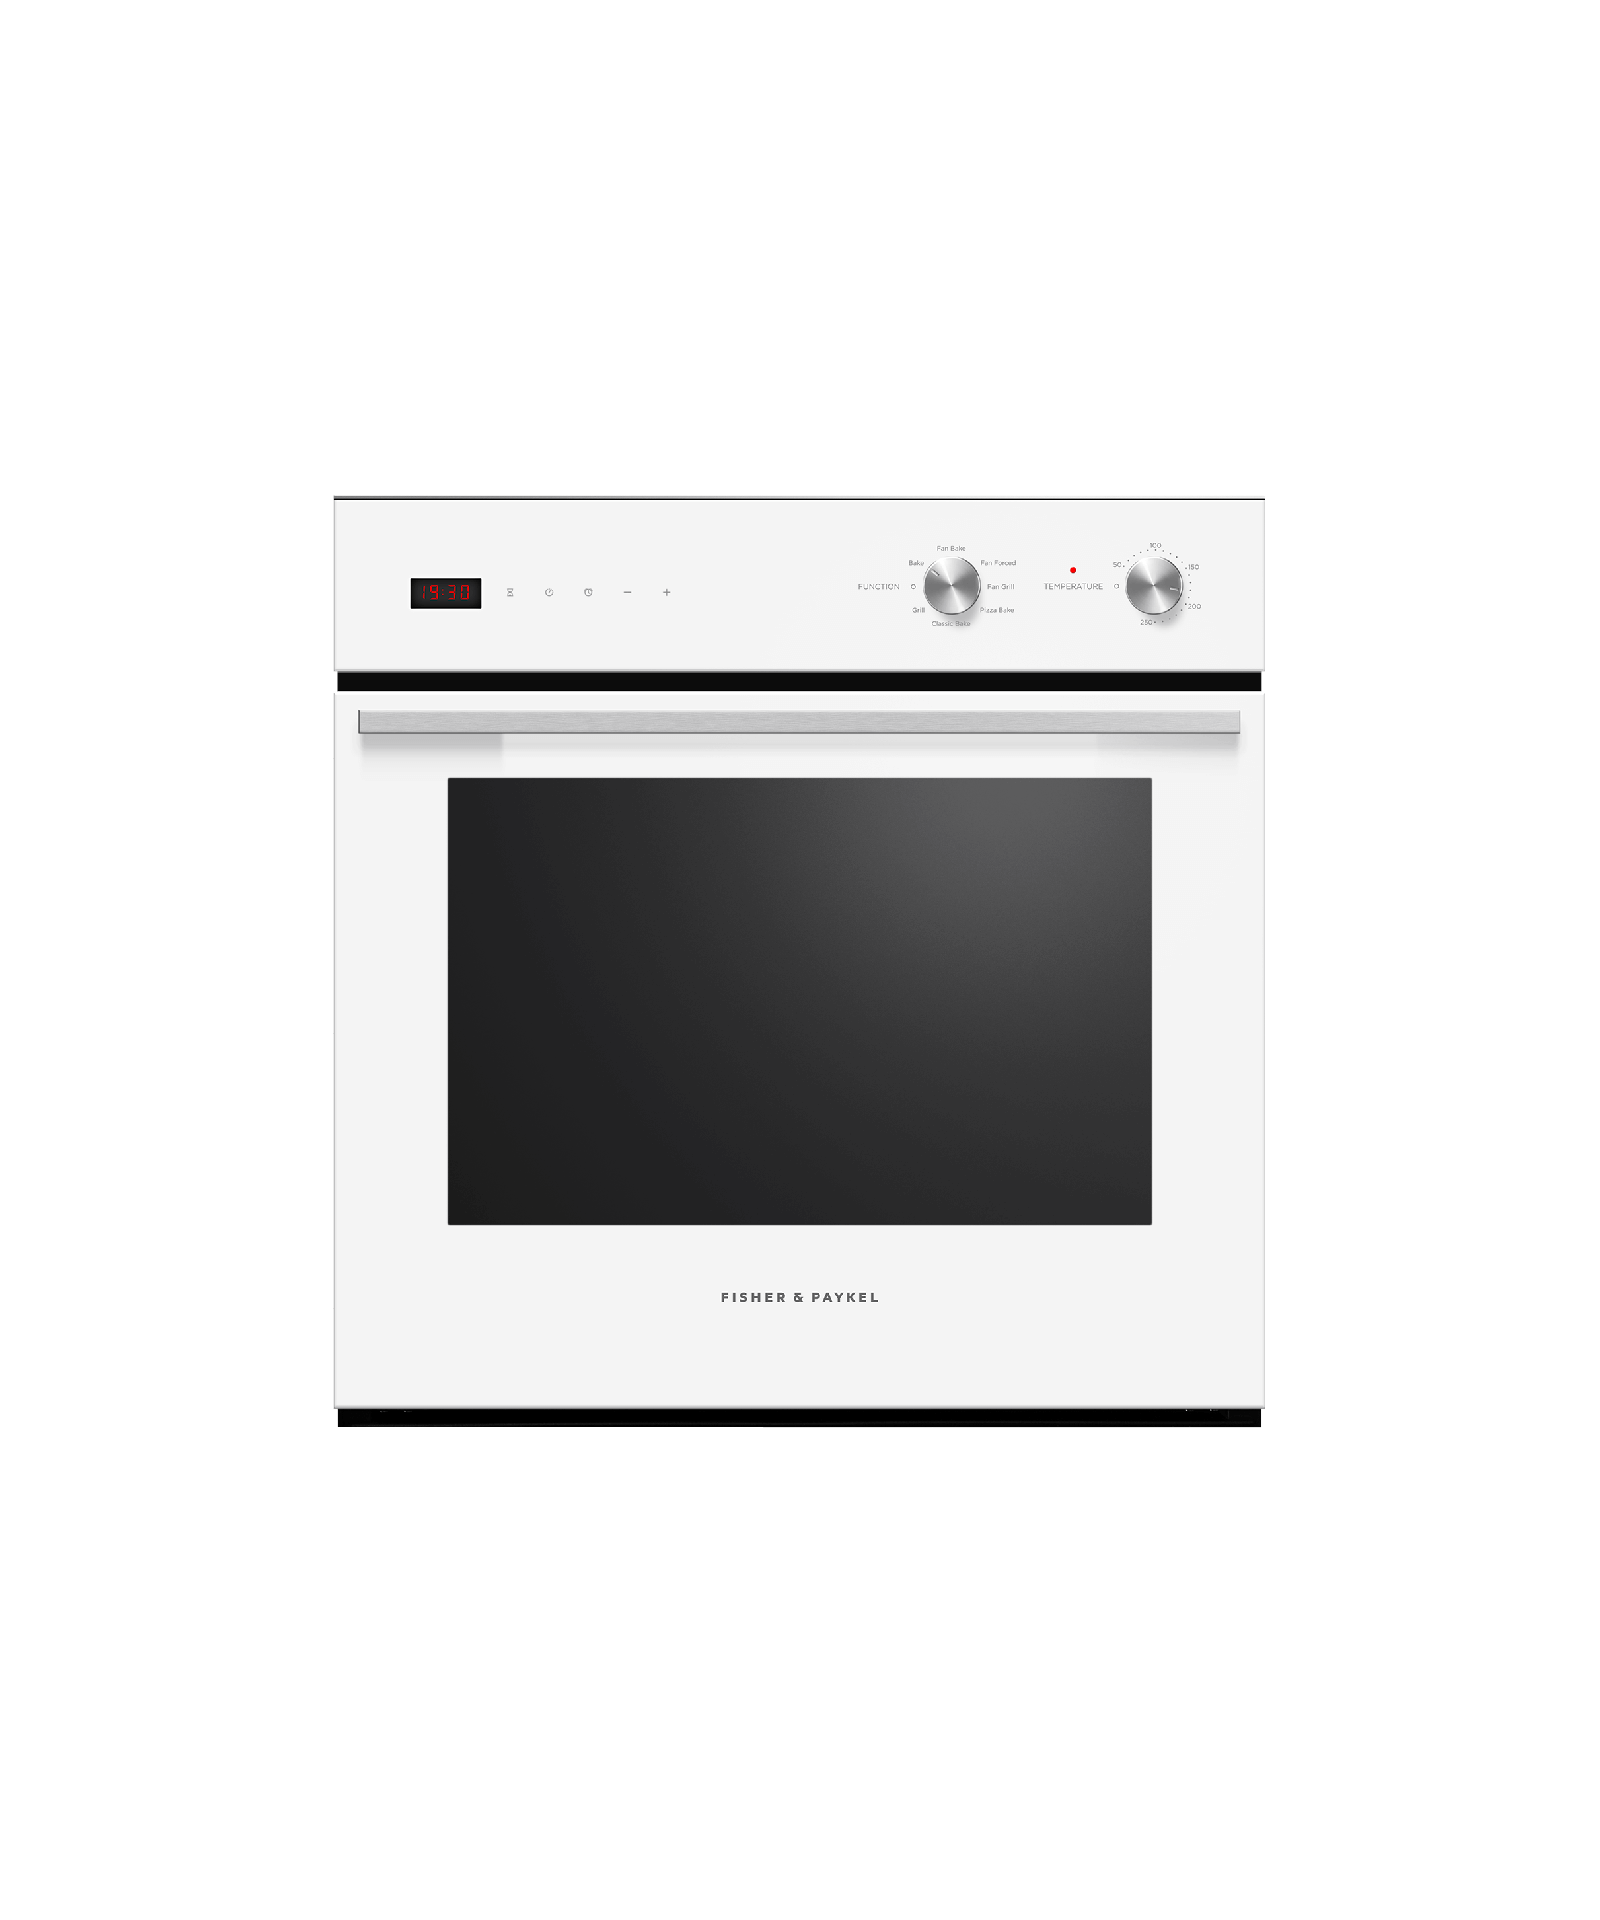 Oven, 60cm, 7 Function